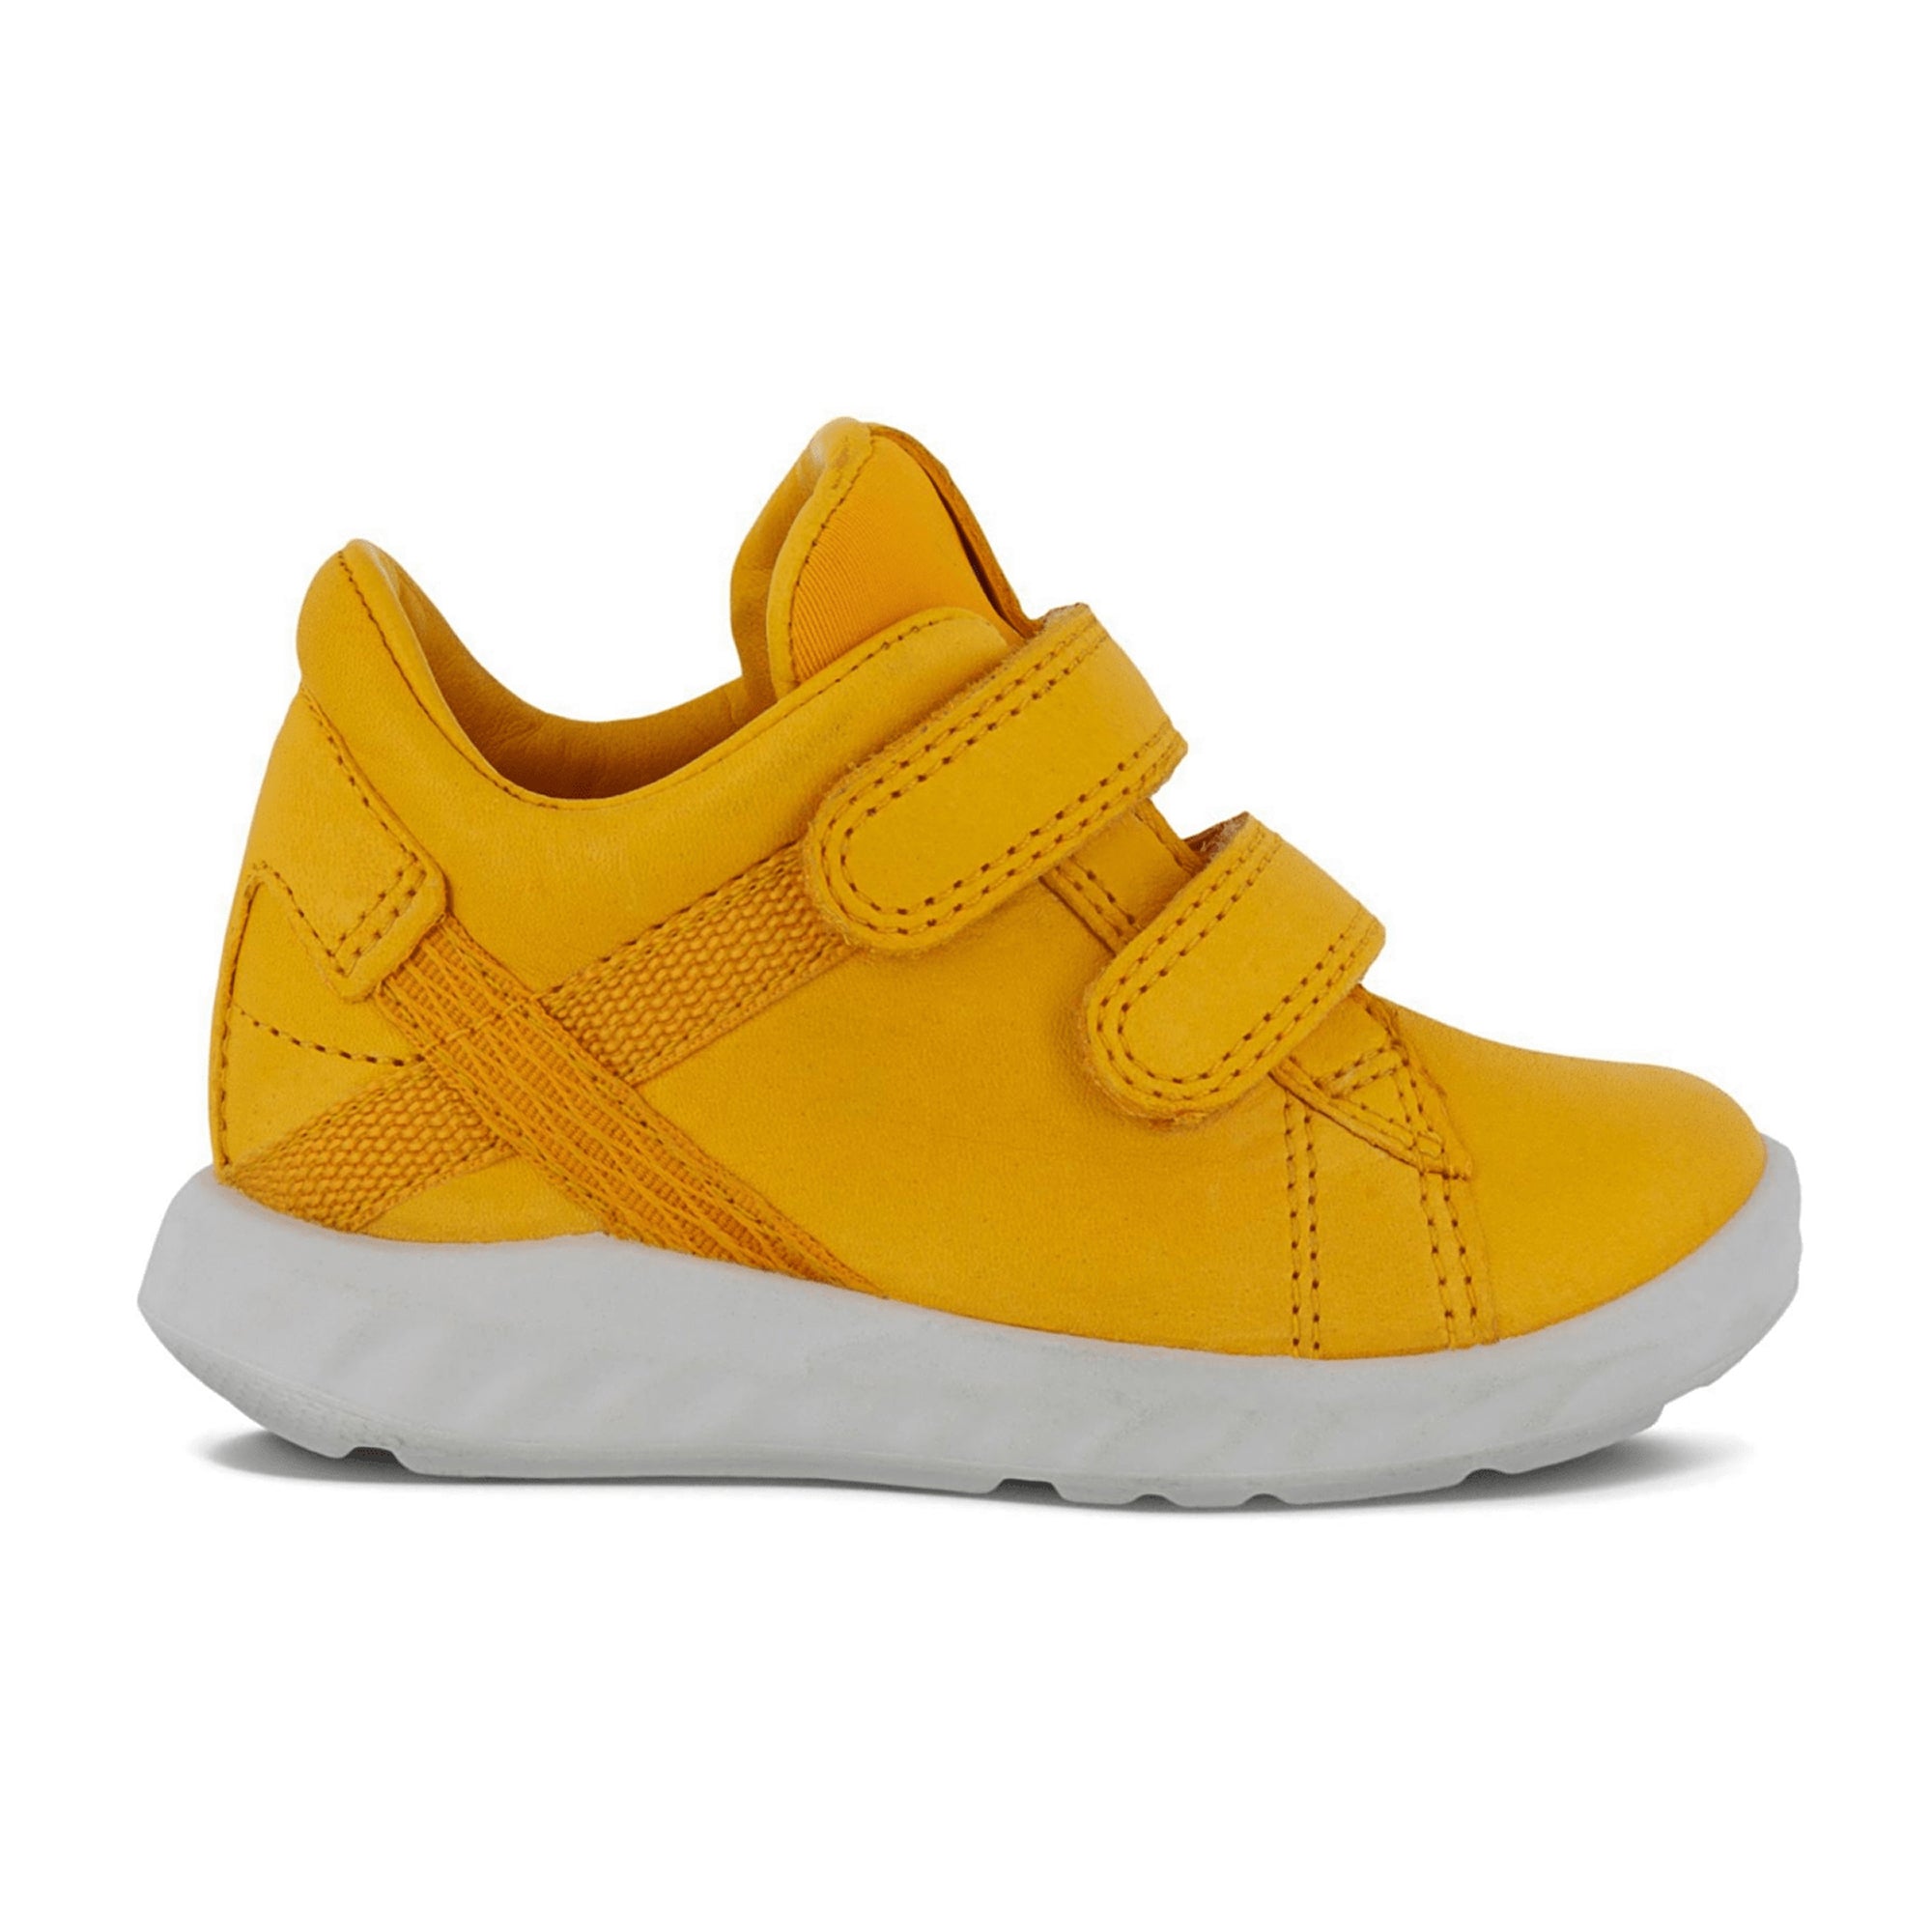 Ecco Kids Yellow Sneakers for Children - Durable & Stylish